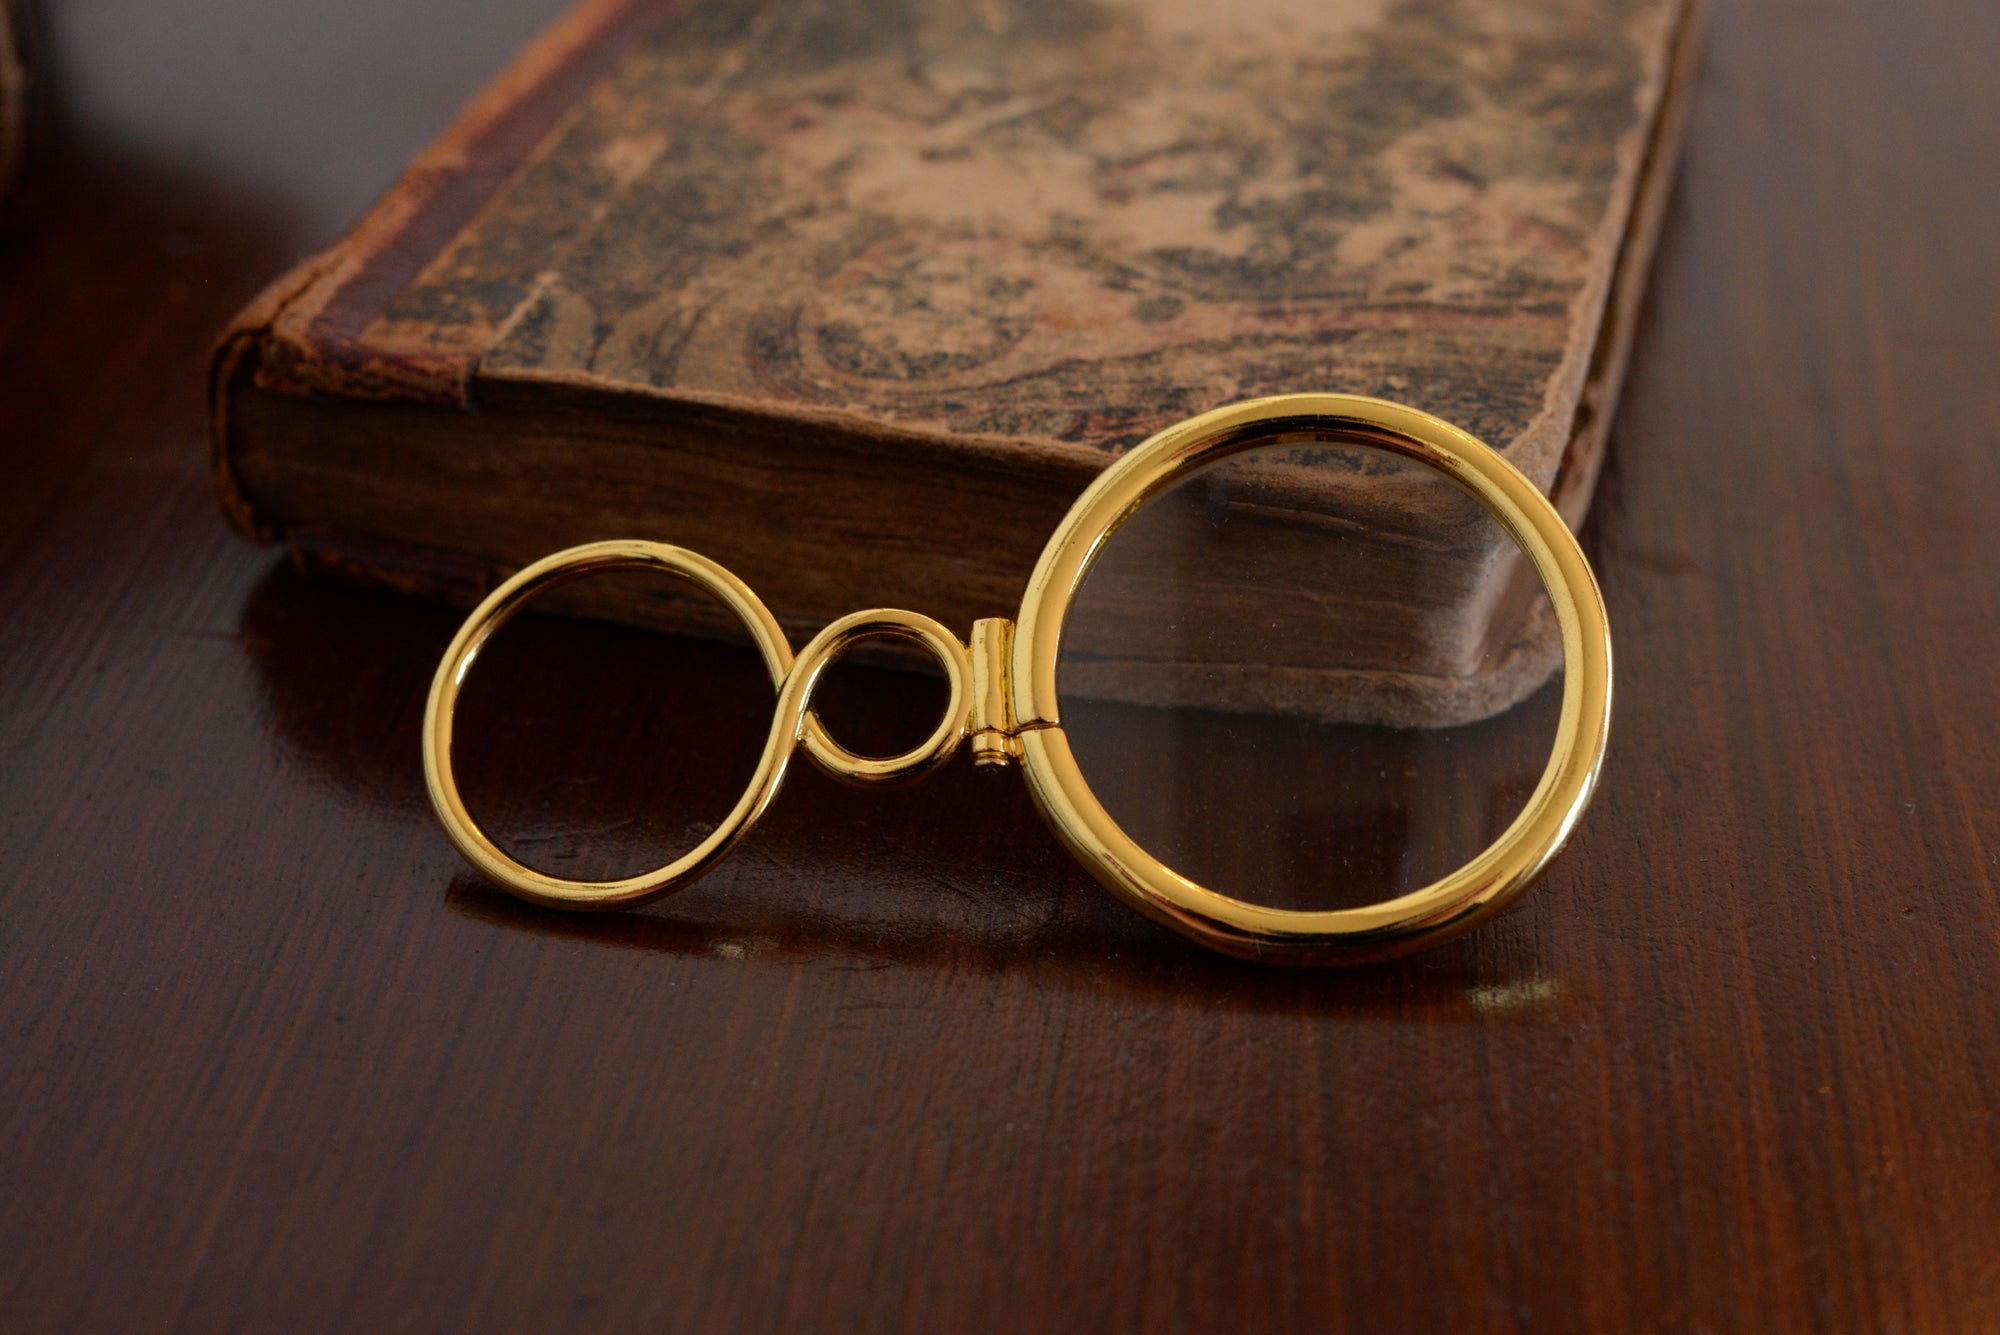 18th century magnifying glass on book